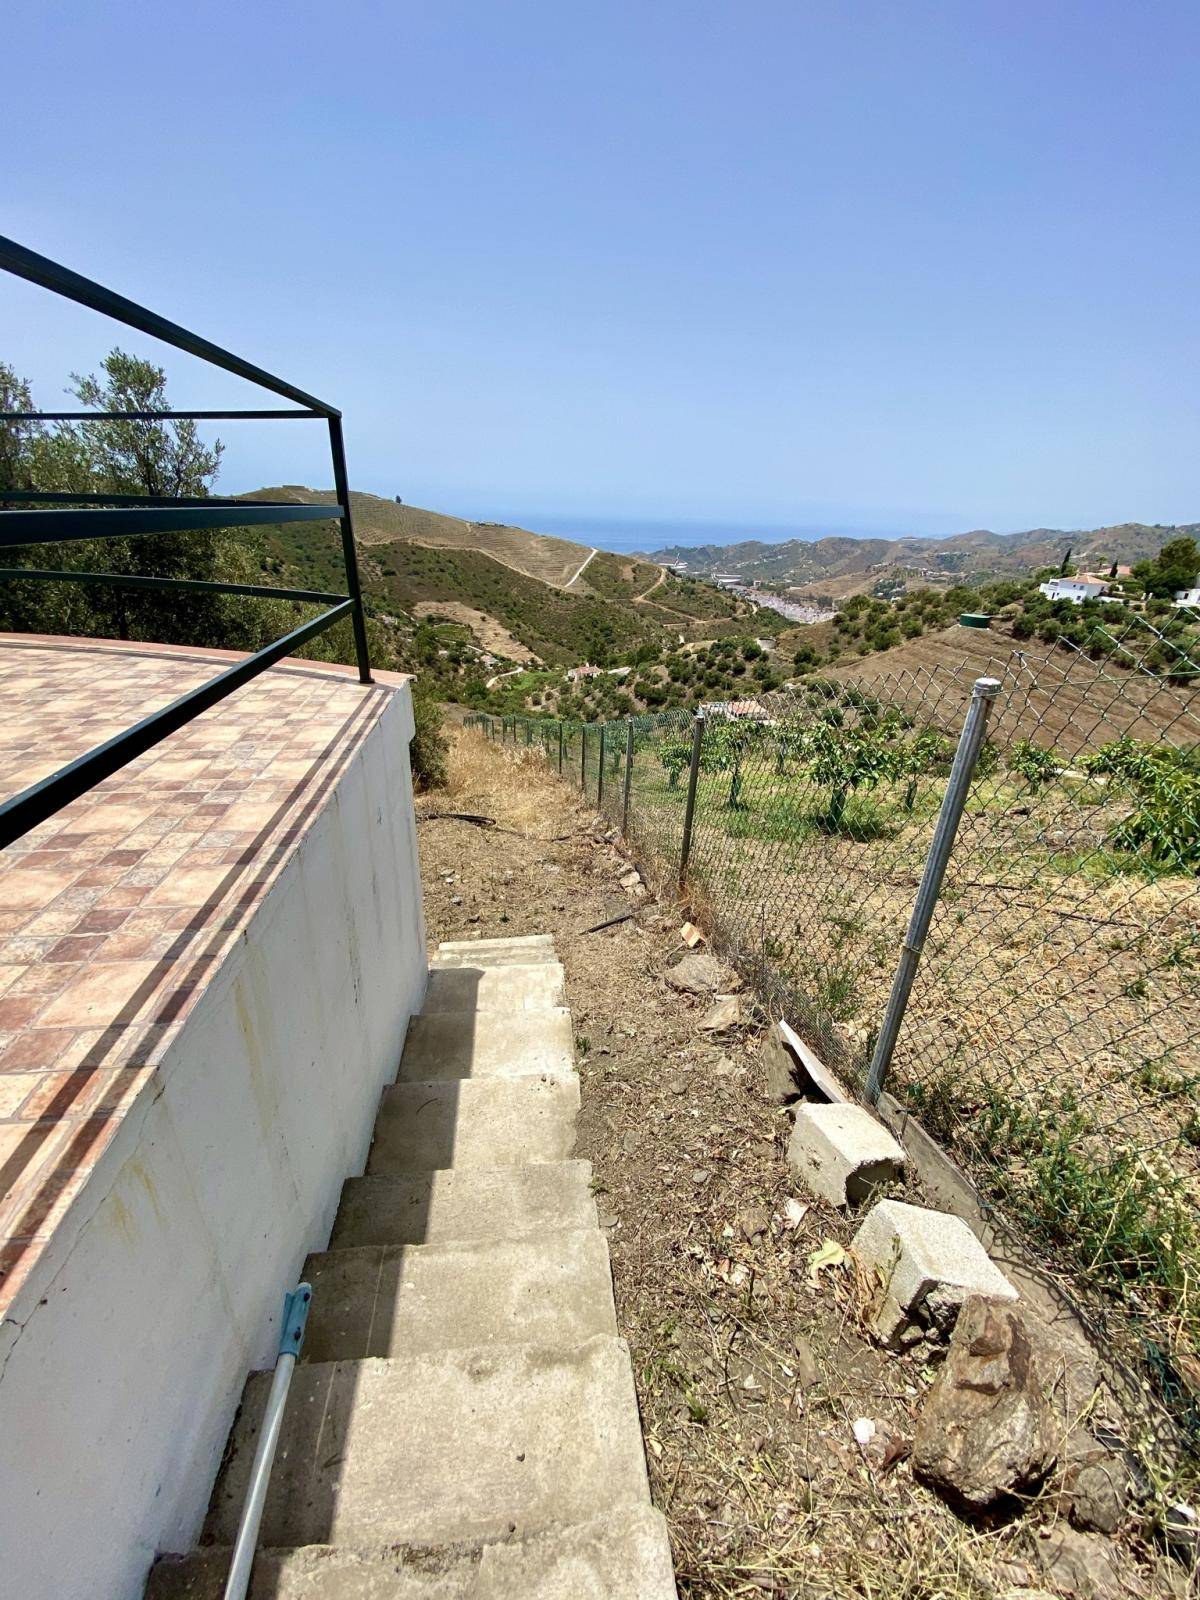 House for sale in Torrox